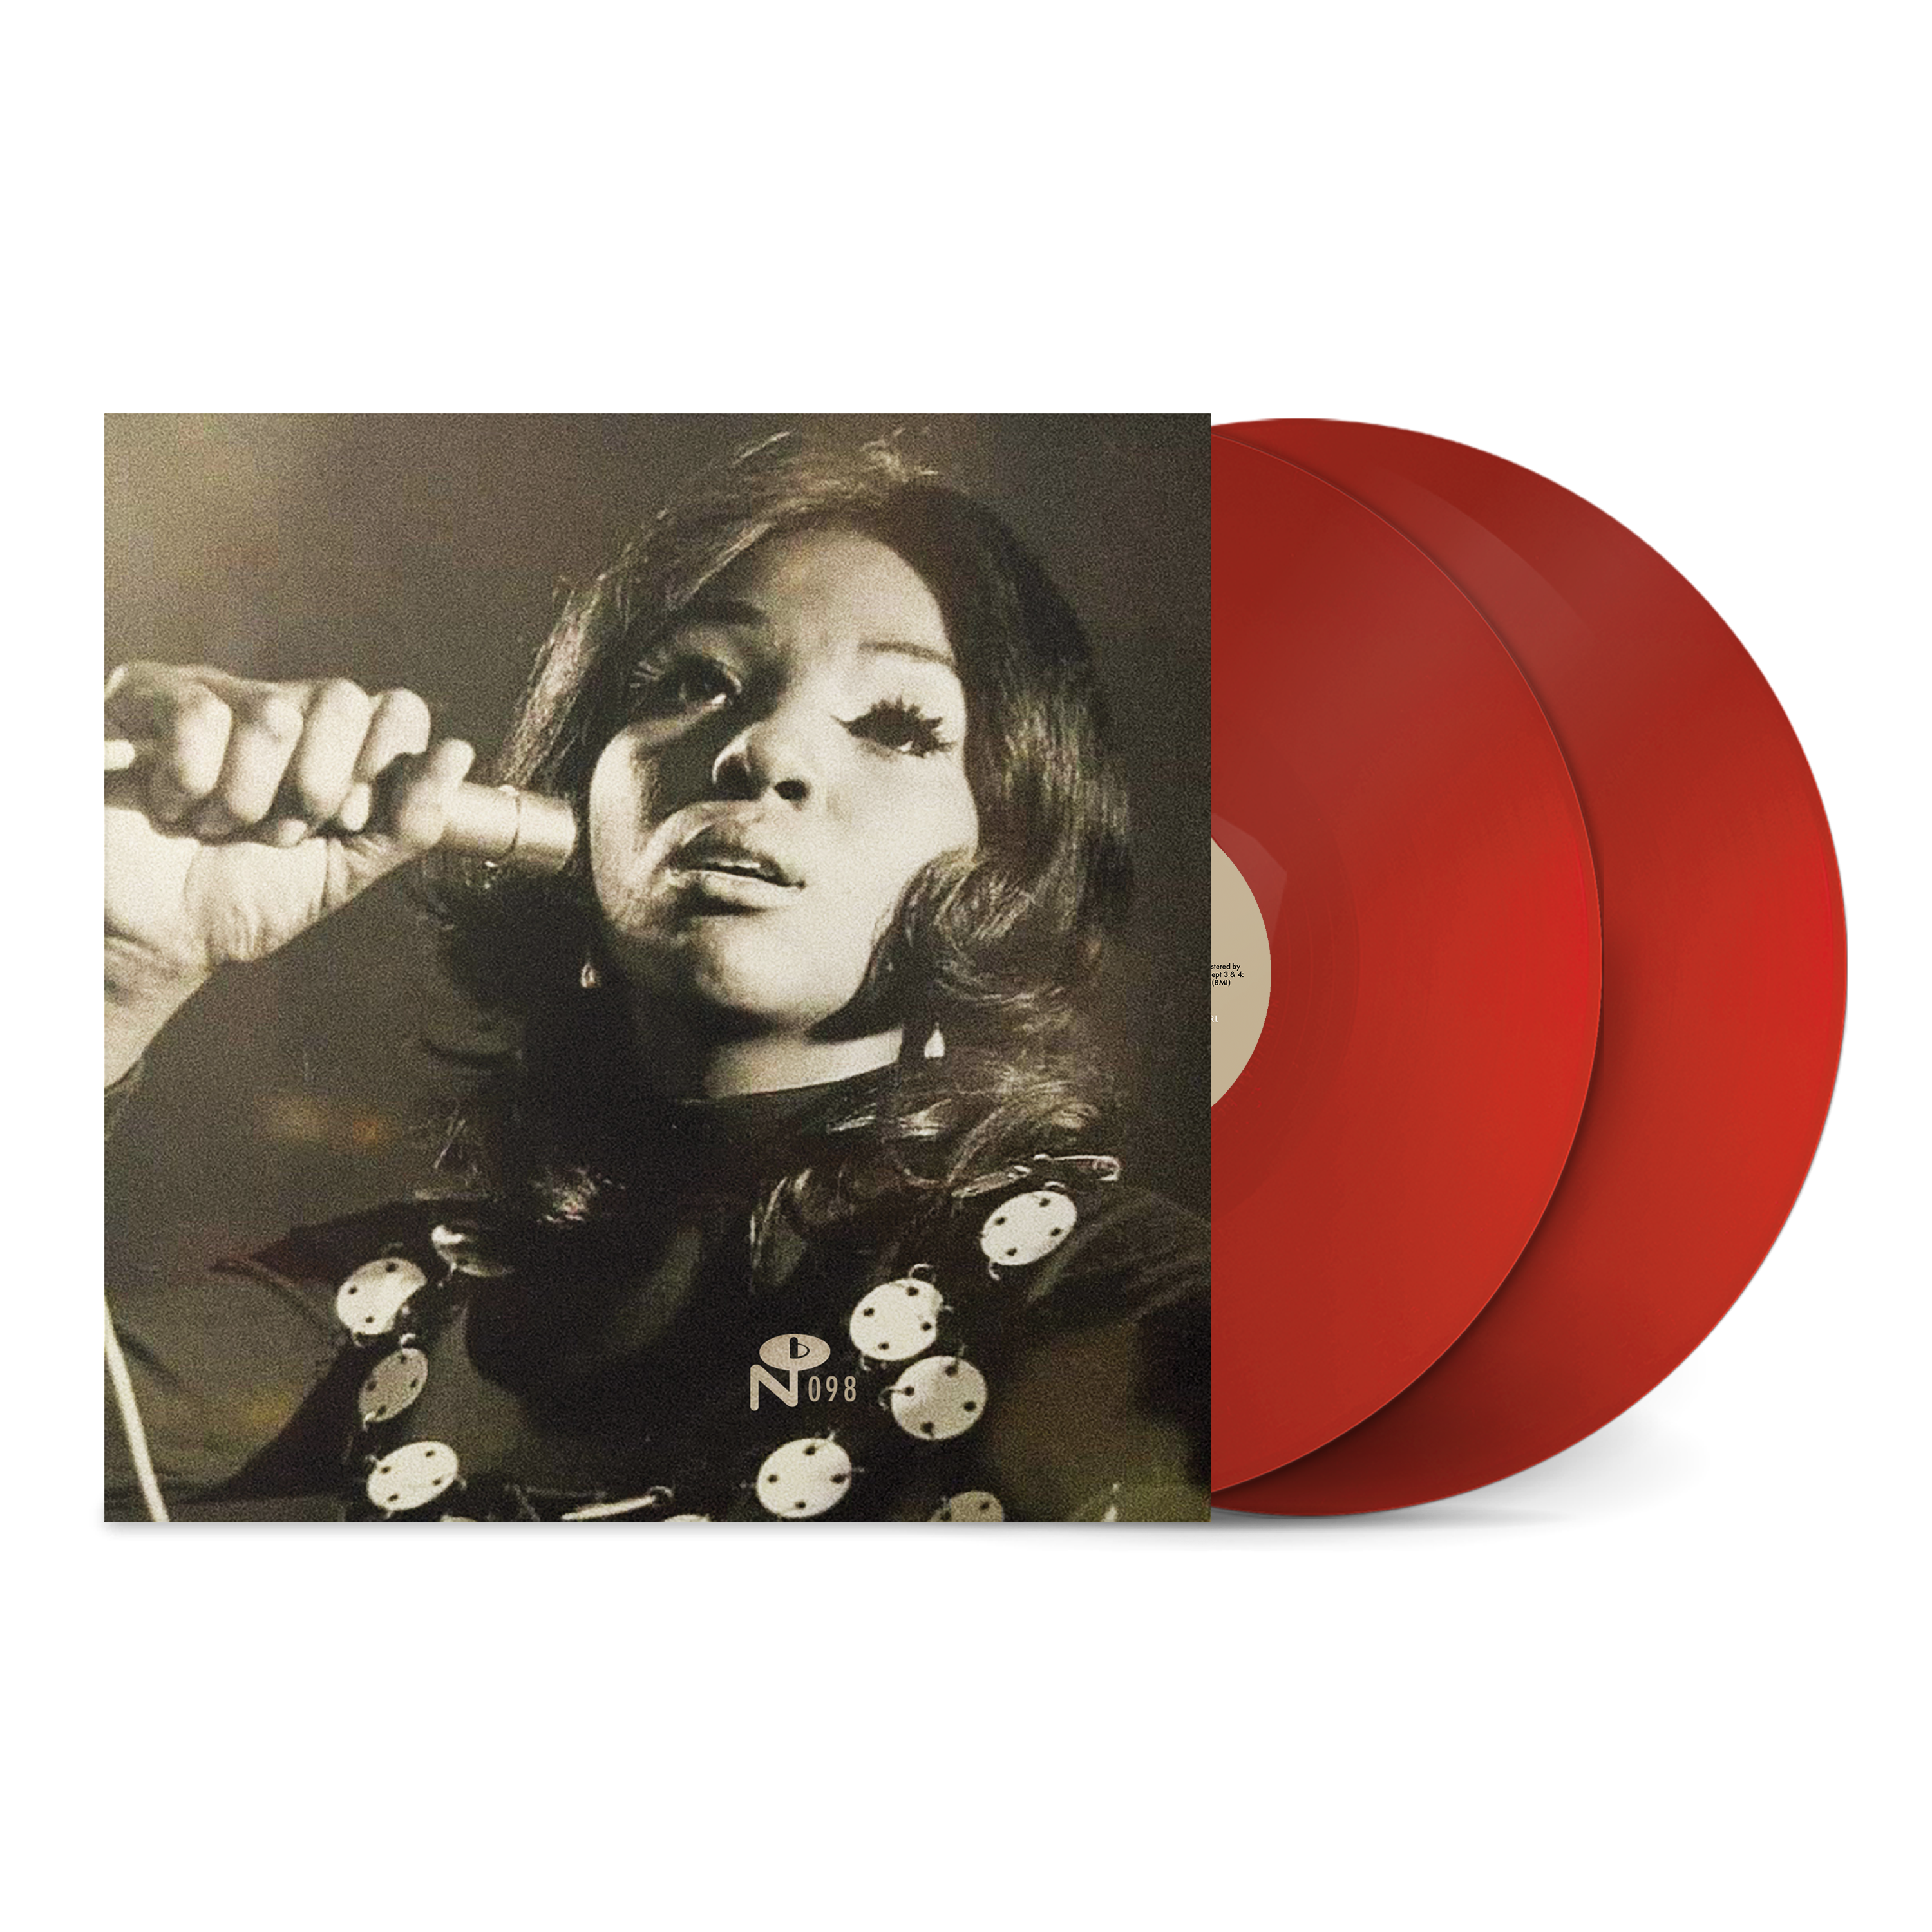 Various Artists - Eccentric Soul - The Cuca Label: Limited Opaque Red Vinyl 2LP